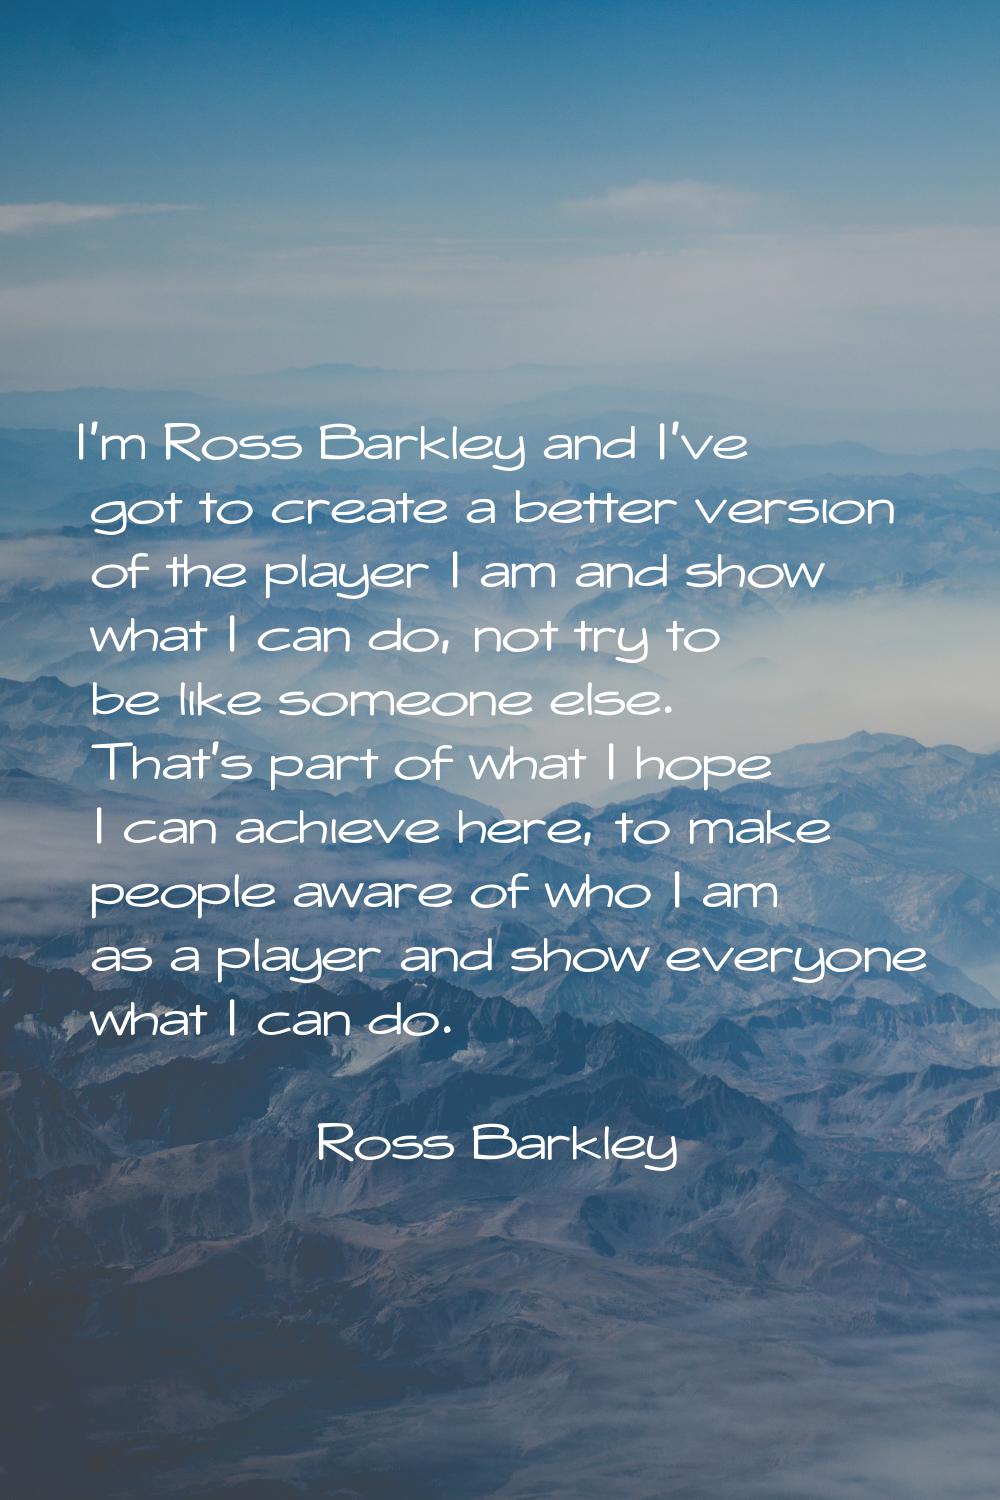 I'm Ross Barkley and I've got to create a better version of the player I am and show what I can do,